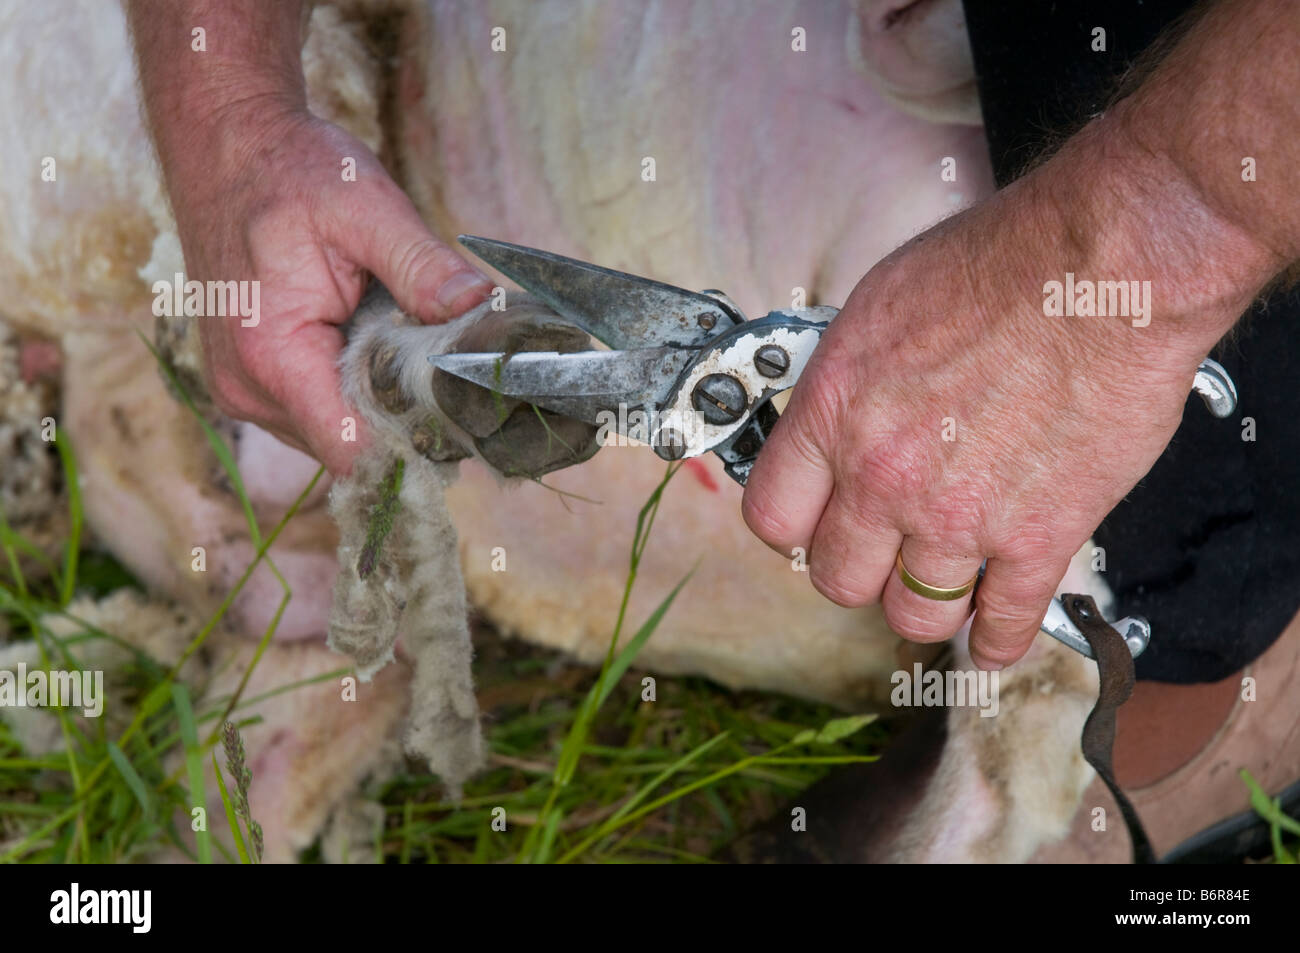 Shearer trimming the hooves of sheep Stock Photo